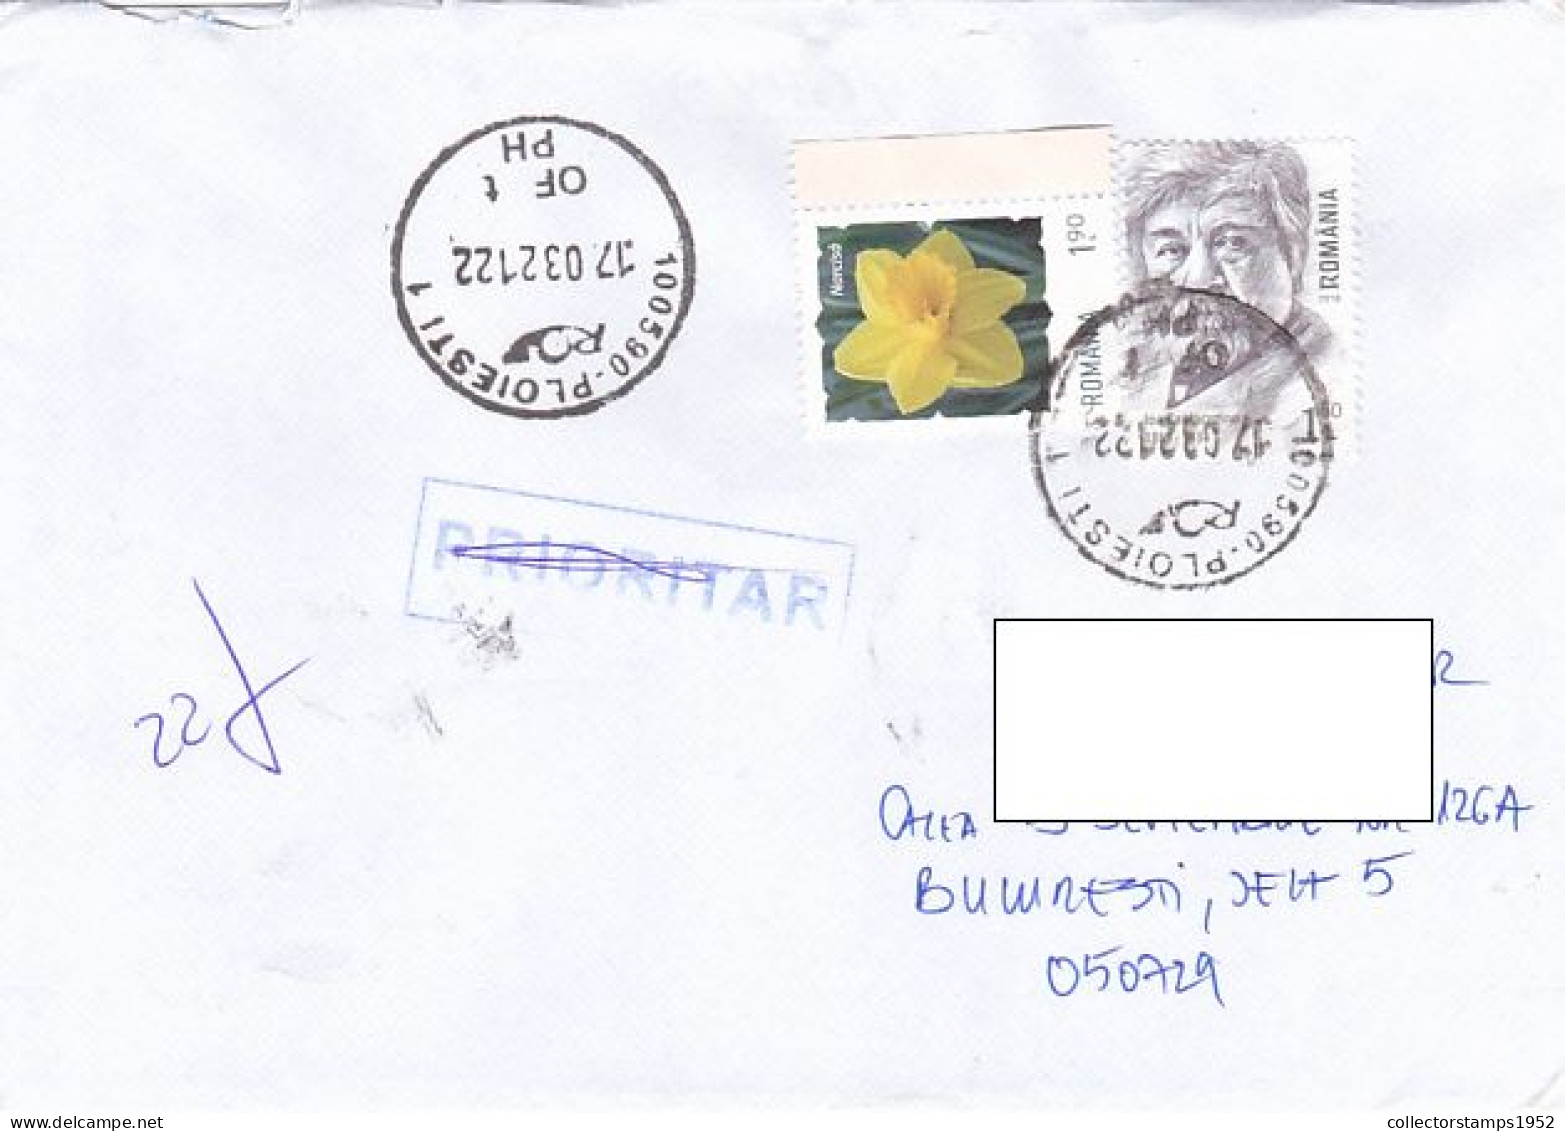 DAFFODIL FLOWER, IOAN CANTACUZINO, FINE STAMPS ON COVER, 2021, ROMANIA - Covers & Documents